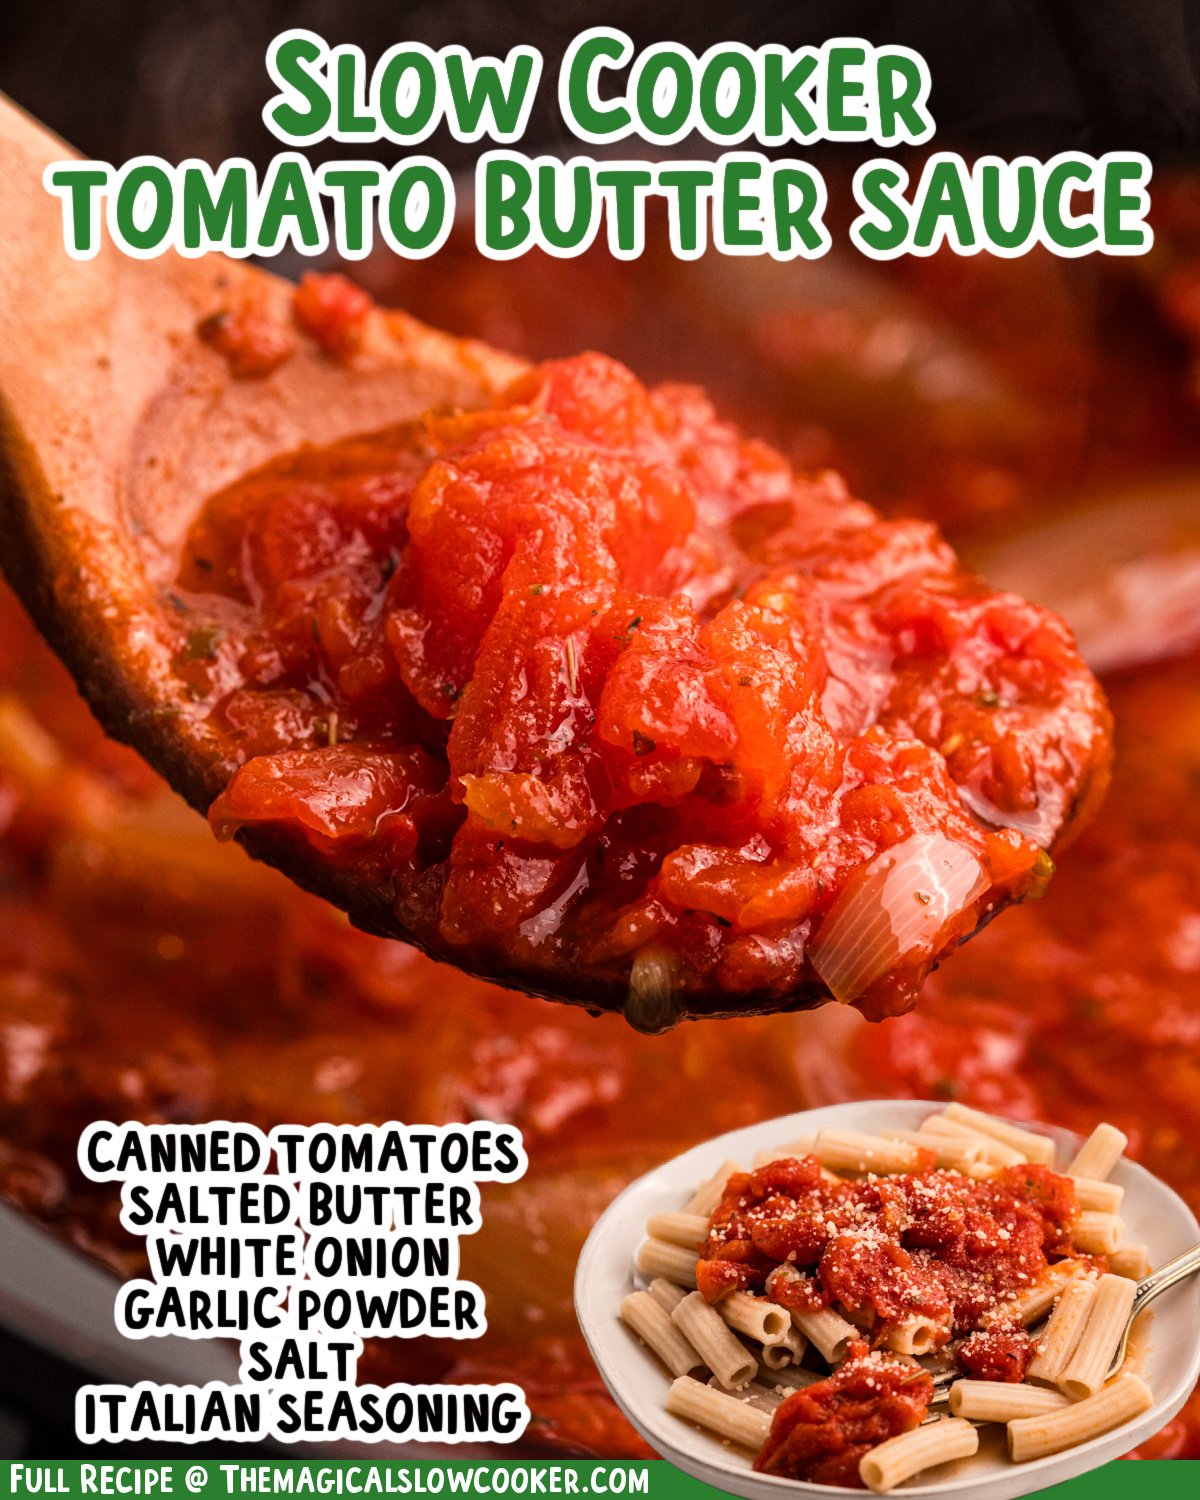 two images of slow cooker tomato butter sauce with text list of ingredients.